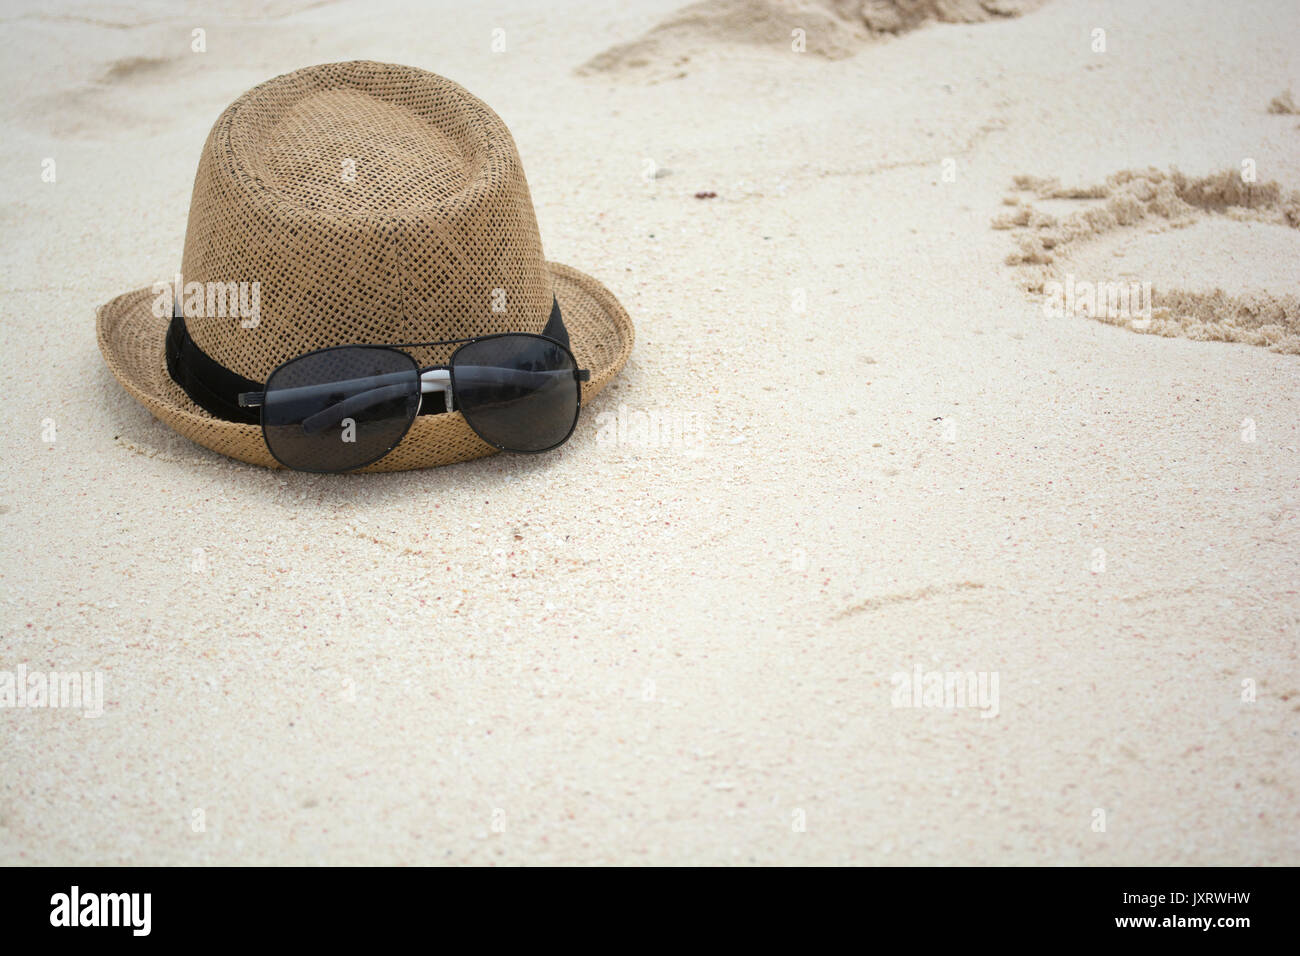 Summer hat and sunglasses on a sunny beach. Stock Photo